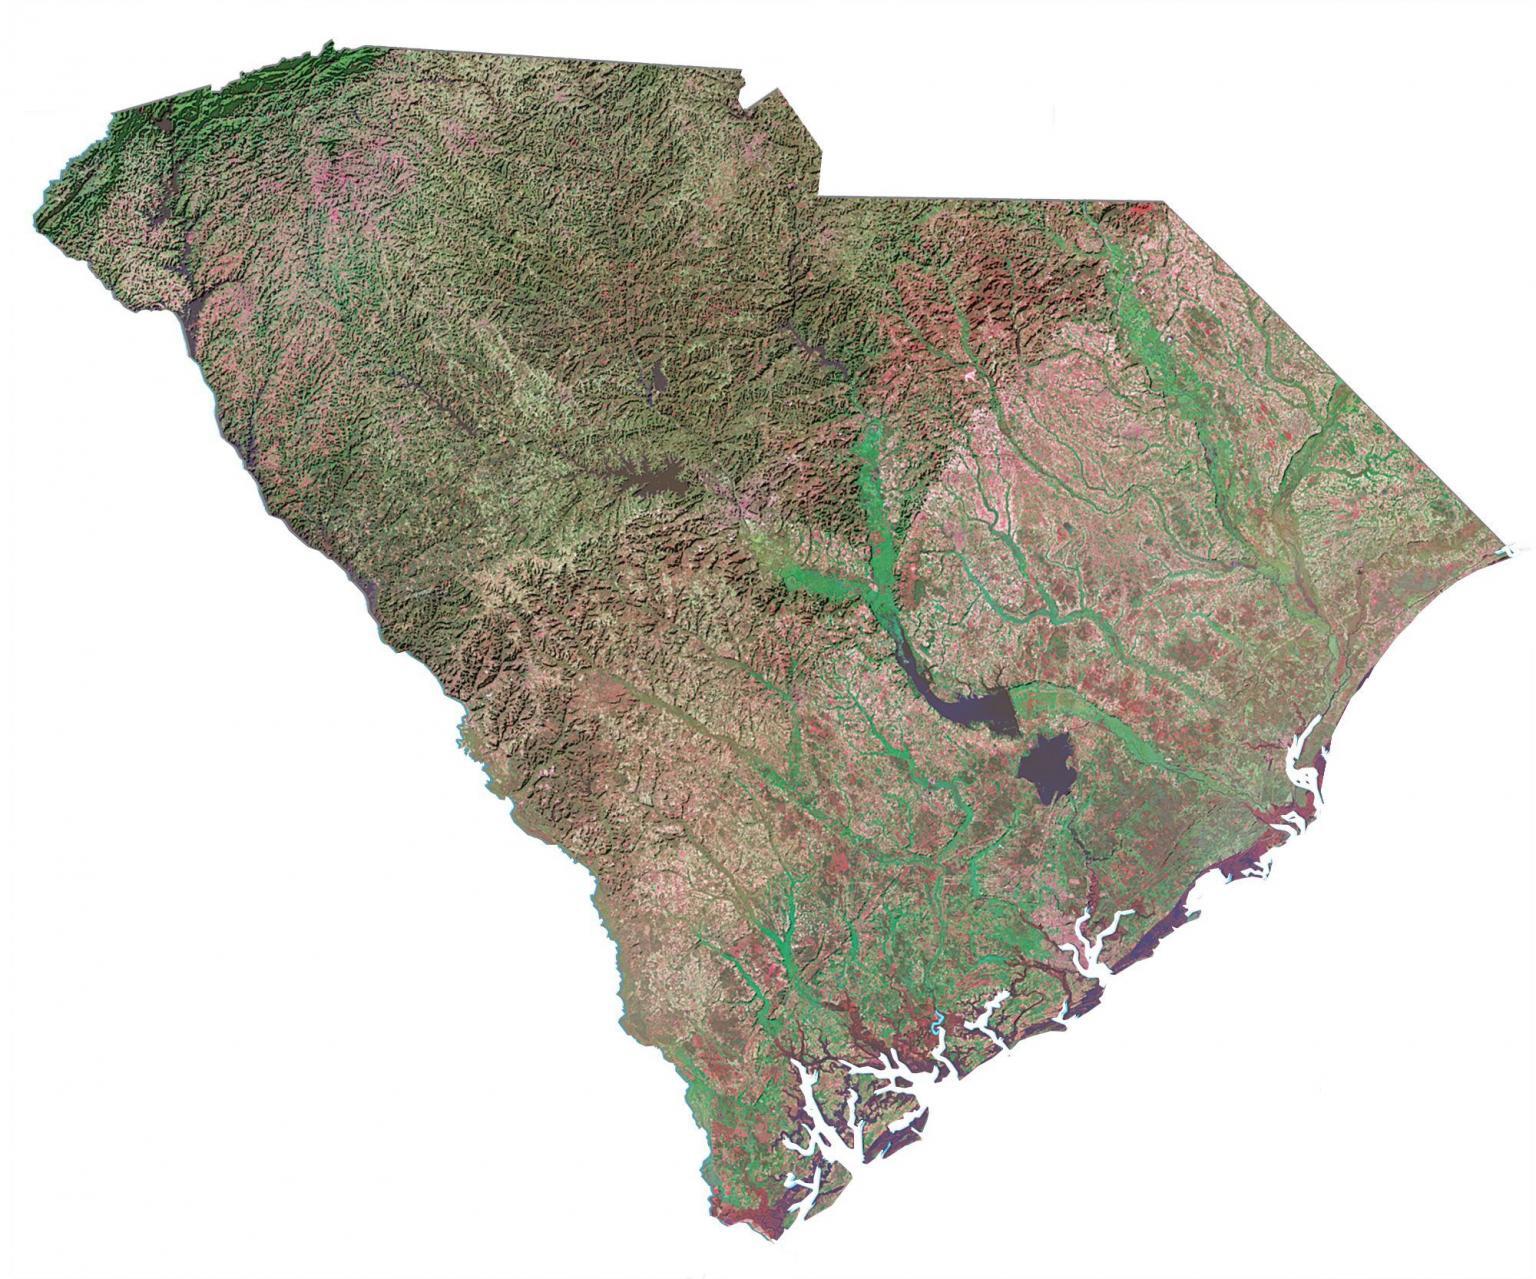 South Carolina Map - Cities and Roads - GIS Geography